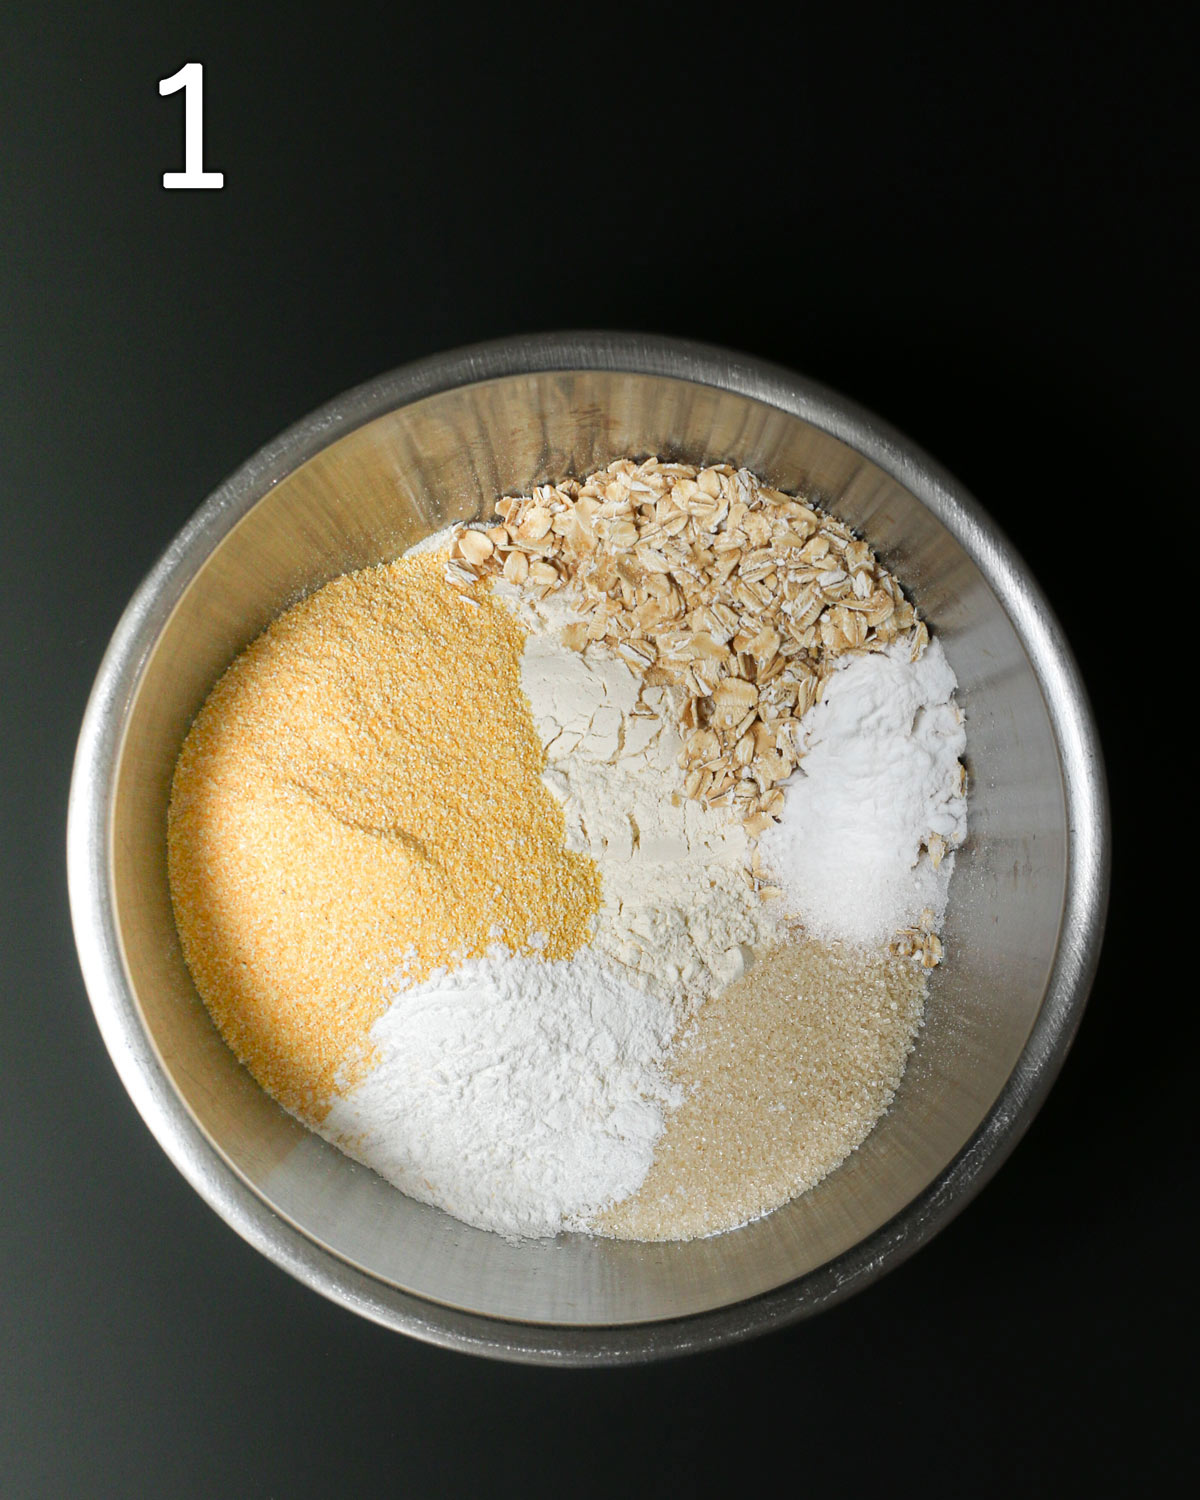 dry ingredients placed in a large metal bowl.